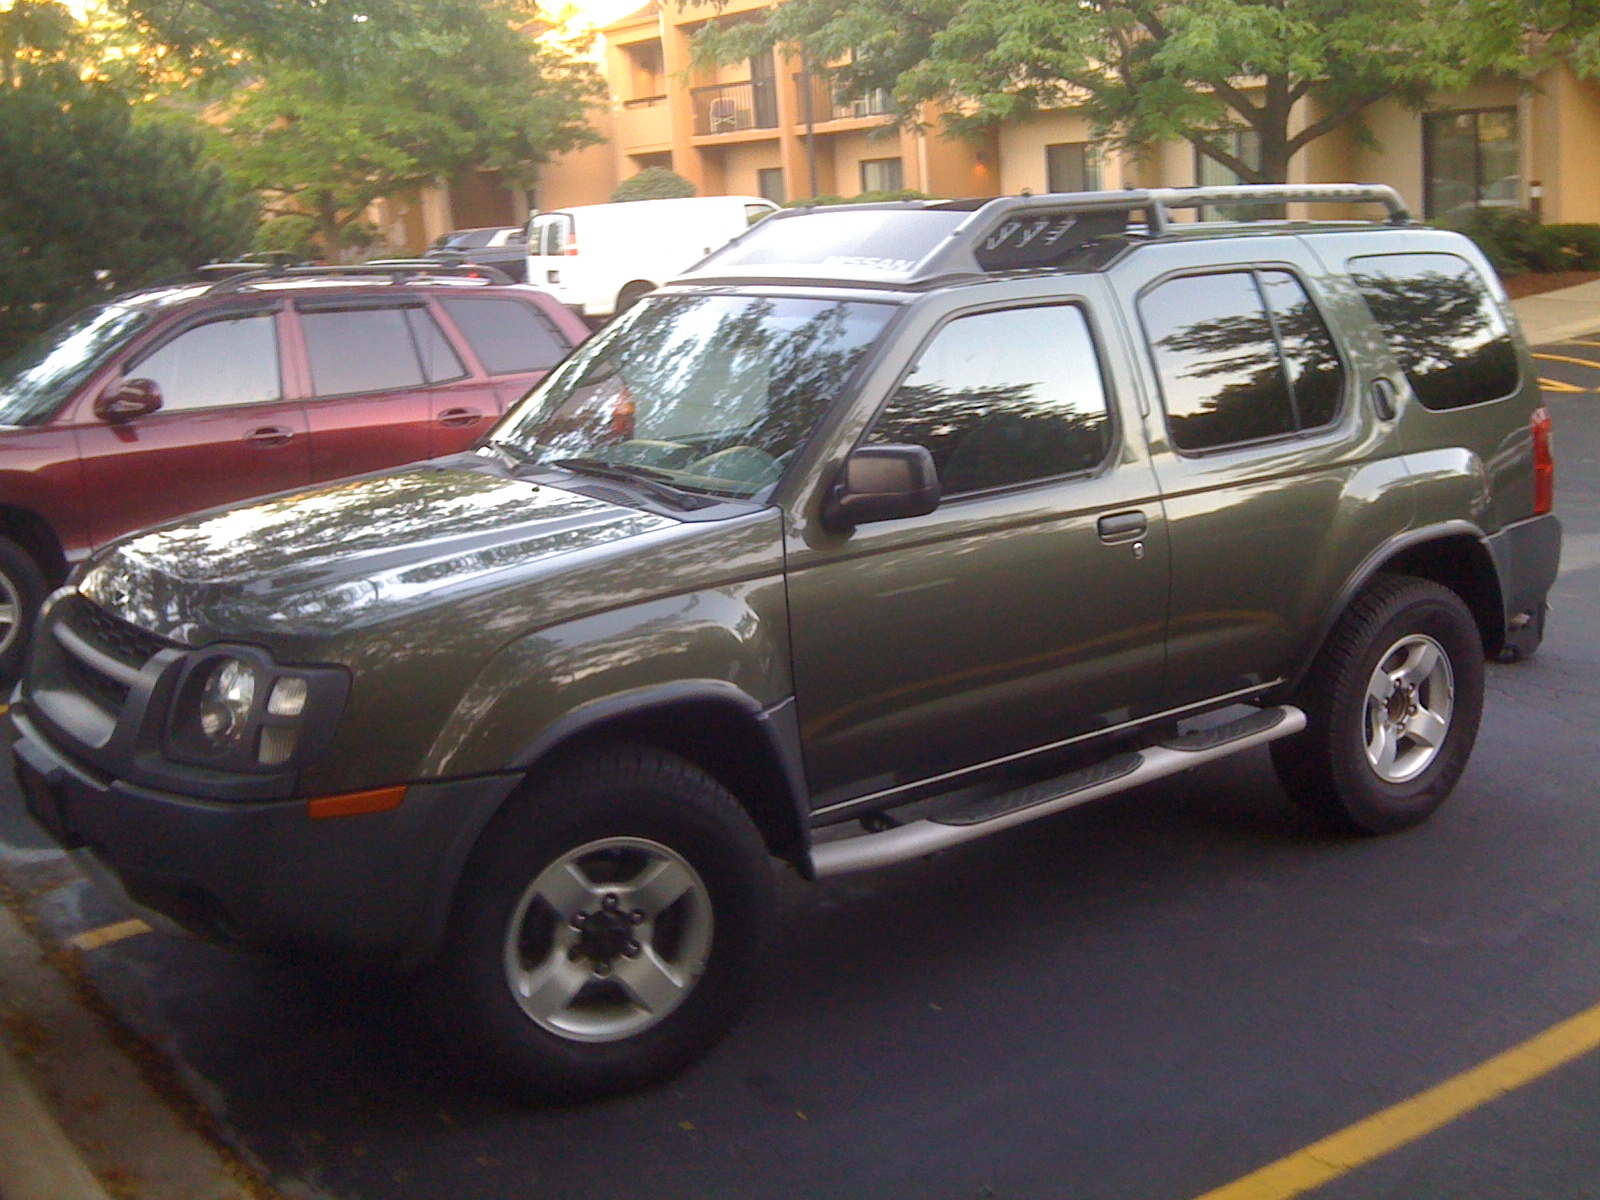 Car Found - 2004 Nissan Xterra 2004 Nissan Frontier Xe V6 Towing Capacity